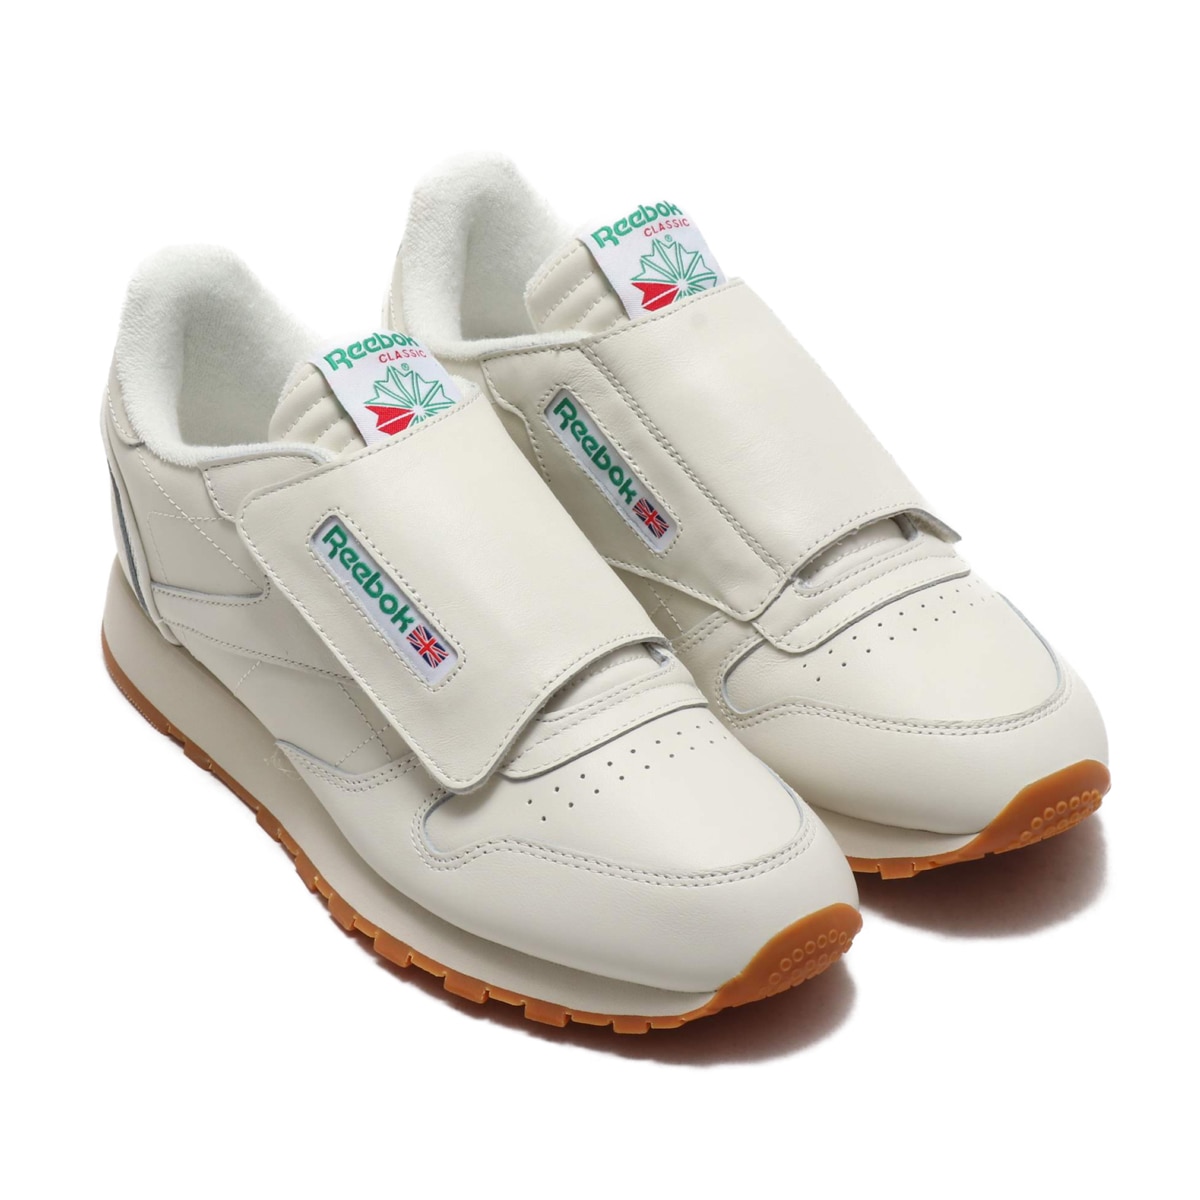 Reebok CLASSIC CL LEATHER STOMPER】リーボック クラシック CL レザー 